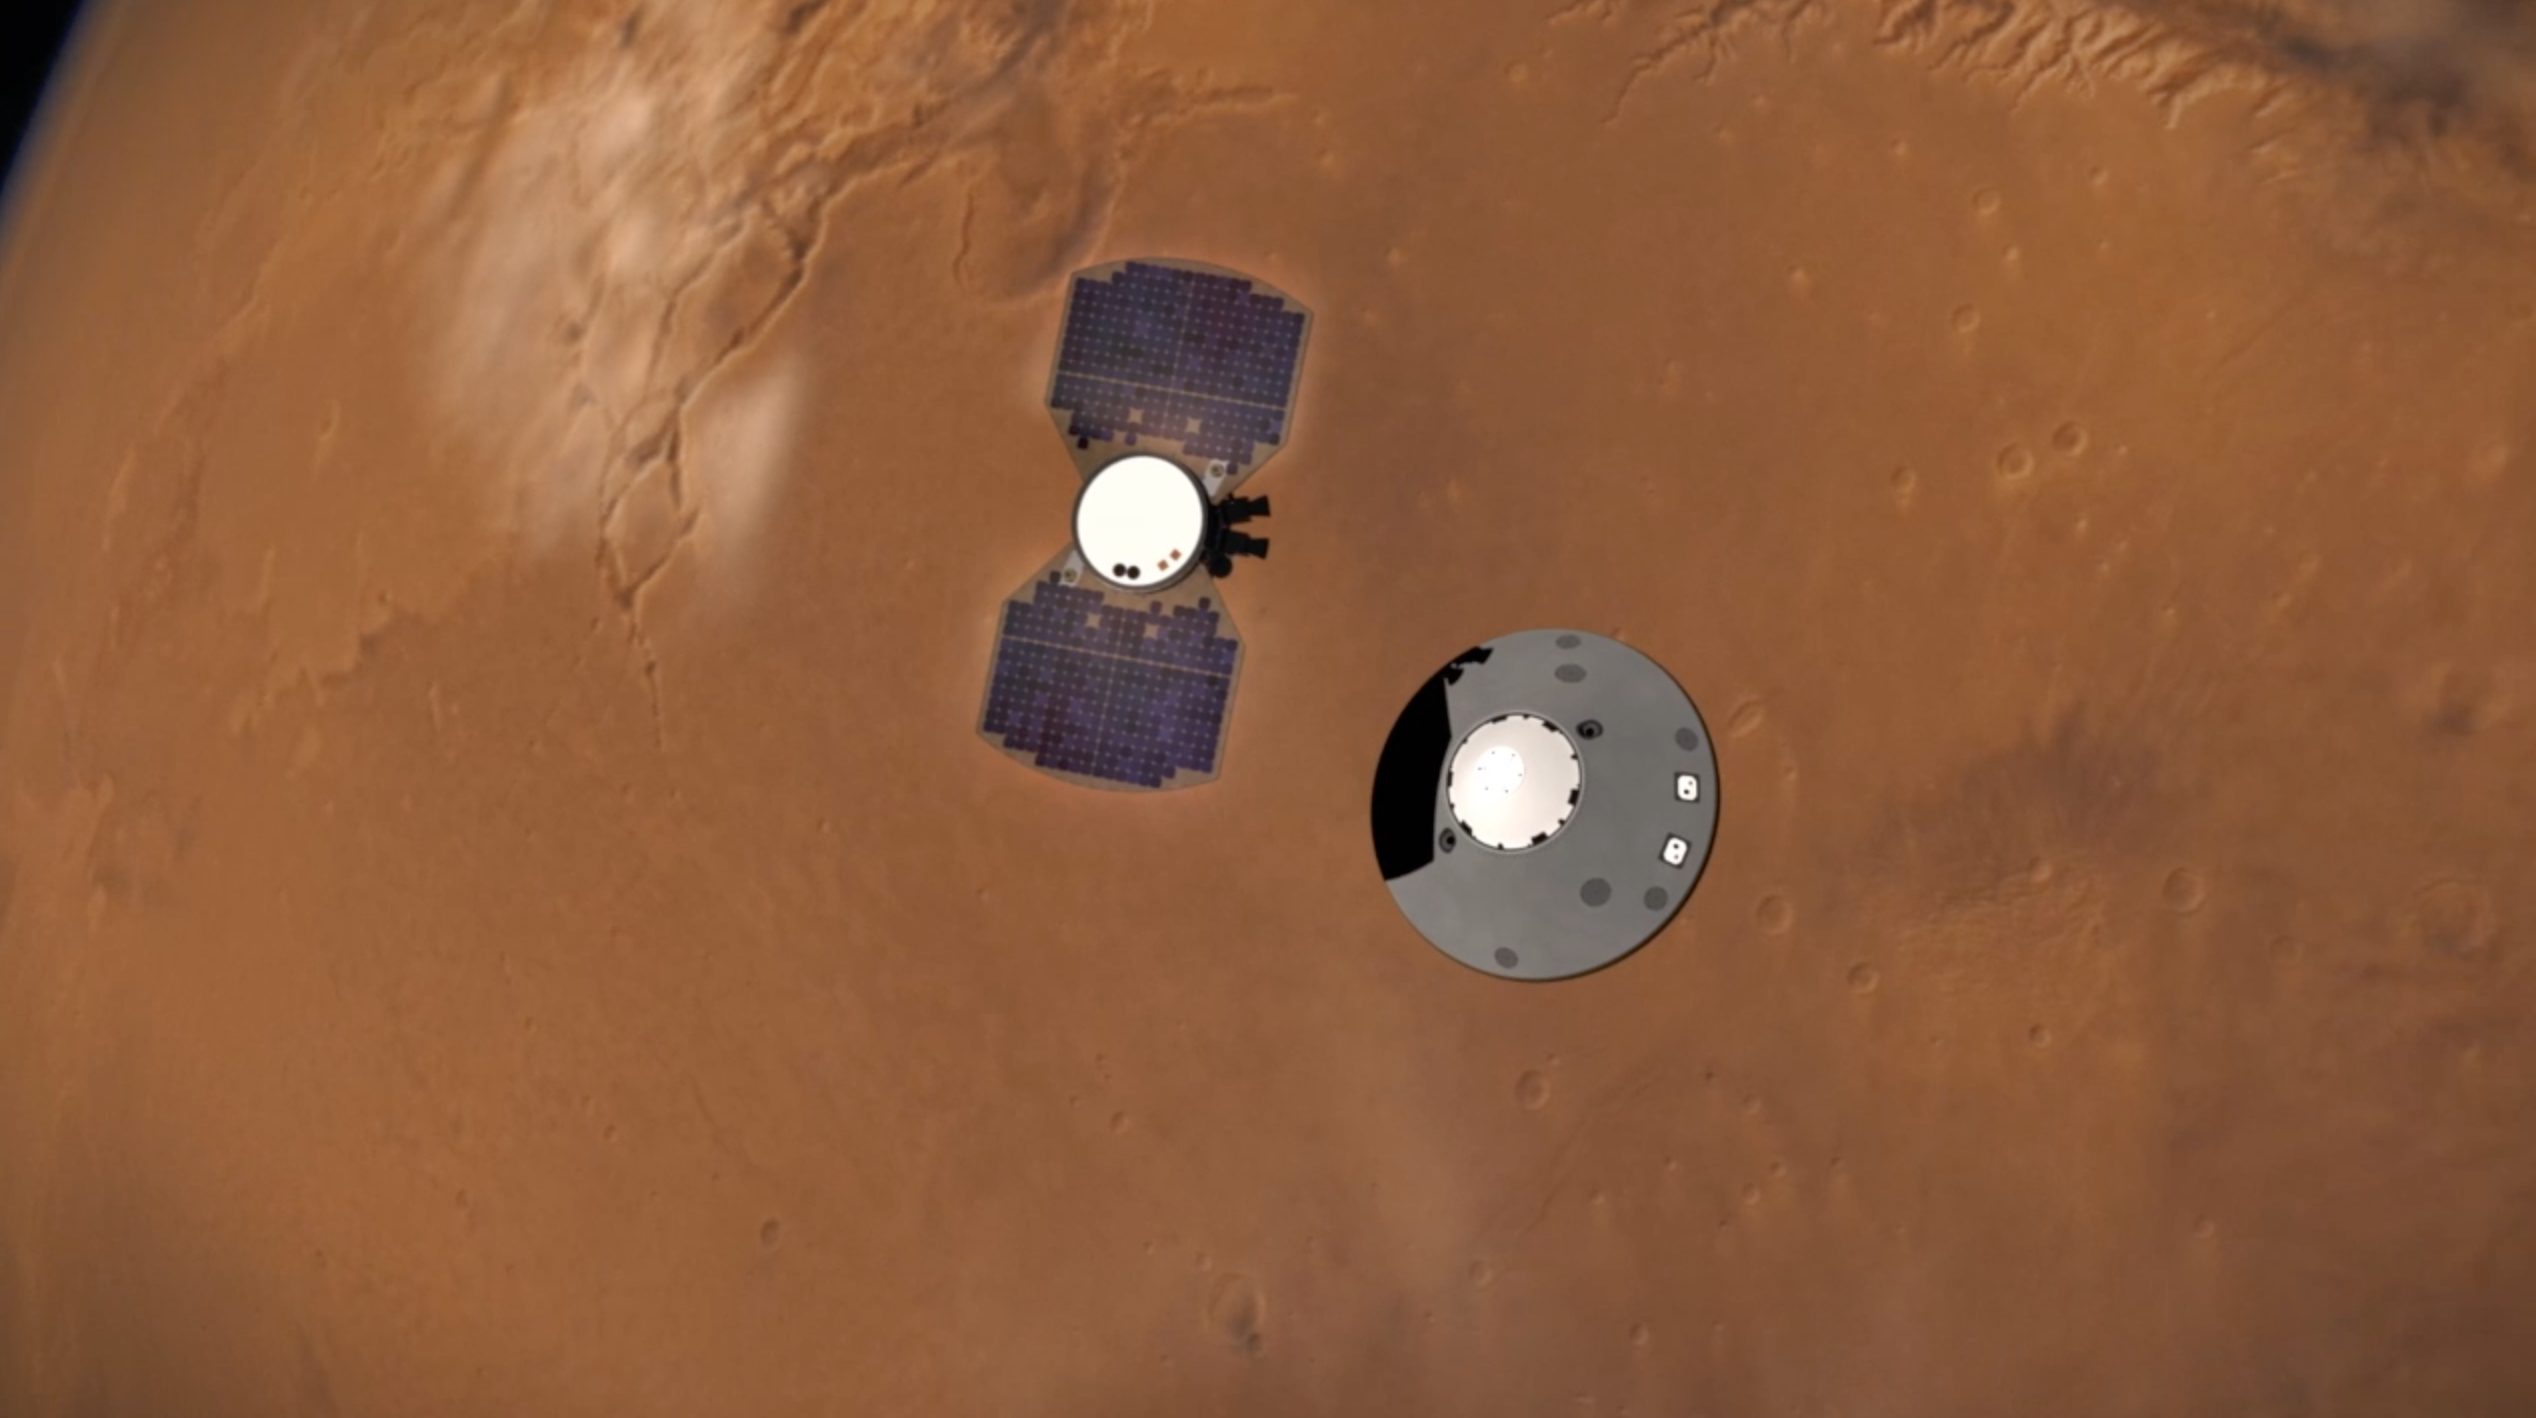 This illustration shows NASA’s InSight lander separating from its cruise stage as it prepares to enter Mars’ atmosphere. The InSight lander is on the right, tucked inside a protective heat shield and back shell. The cruise stage with solar panels is on the left.